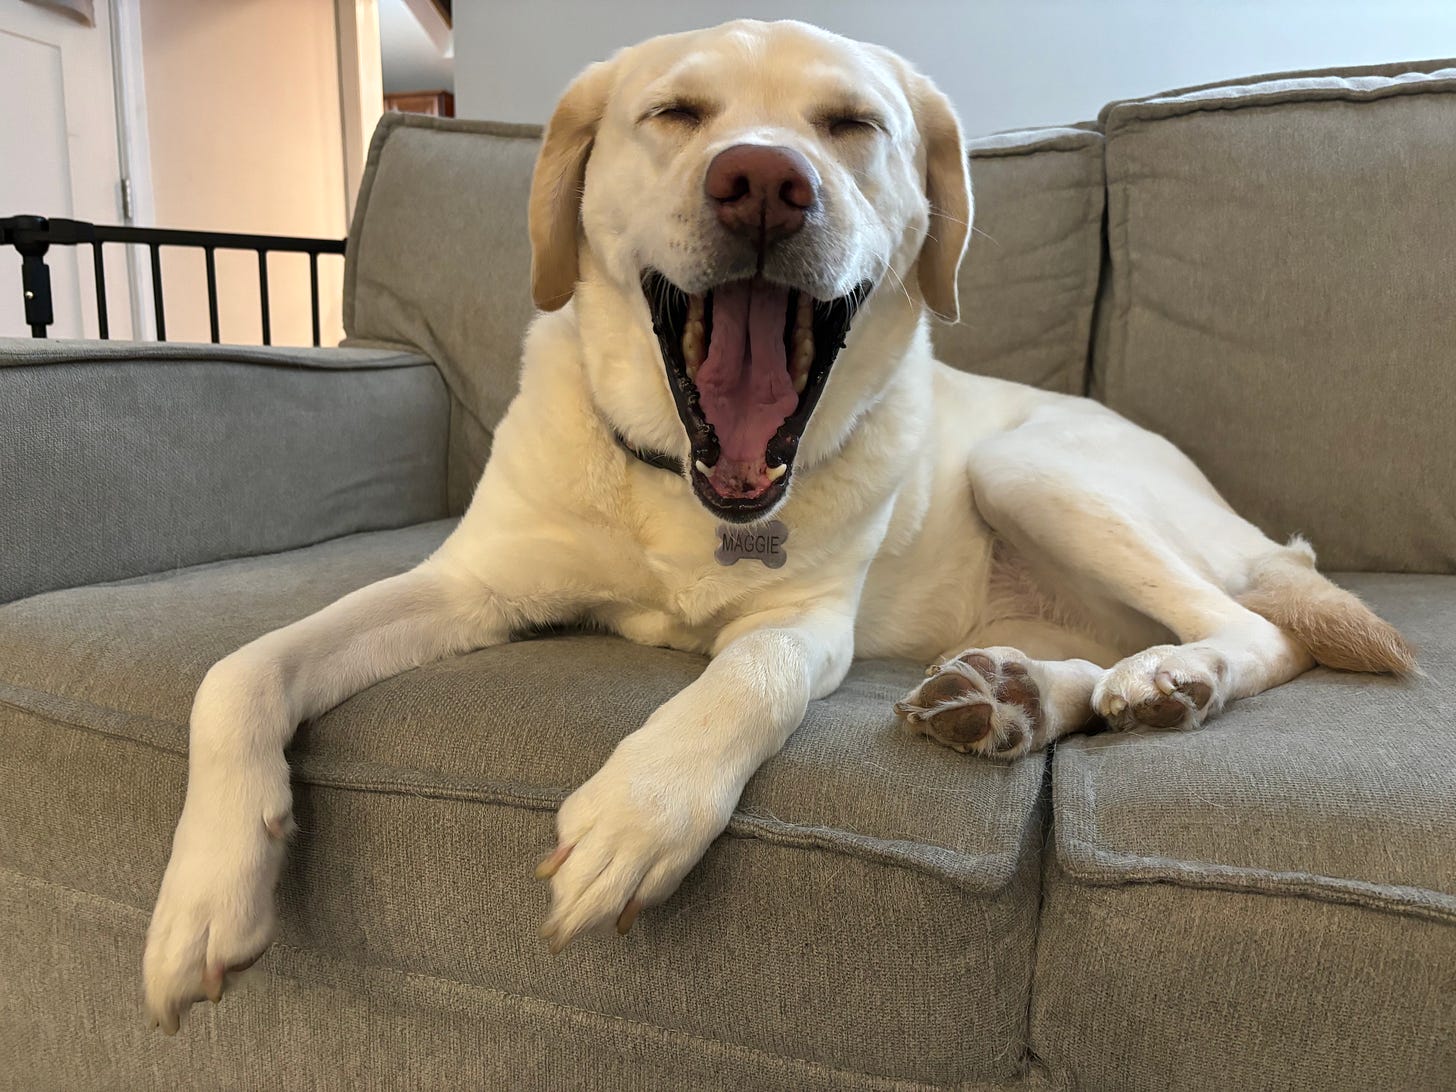 A yellow Labrador retriever  yawns with her mouth open wide on a gray couch.